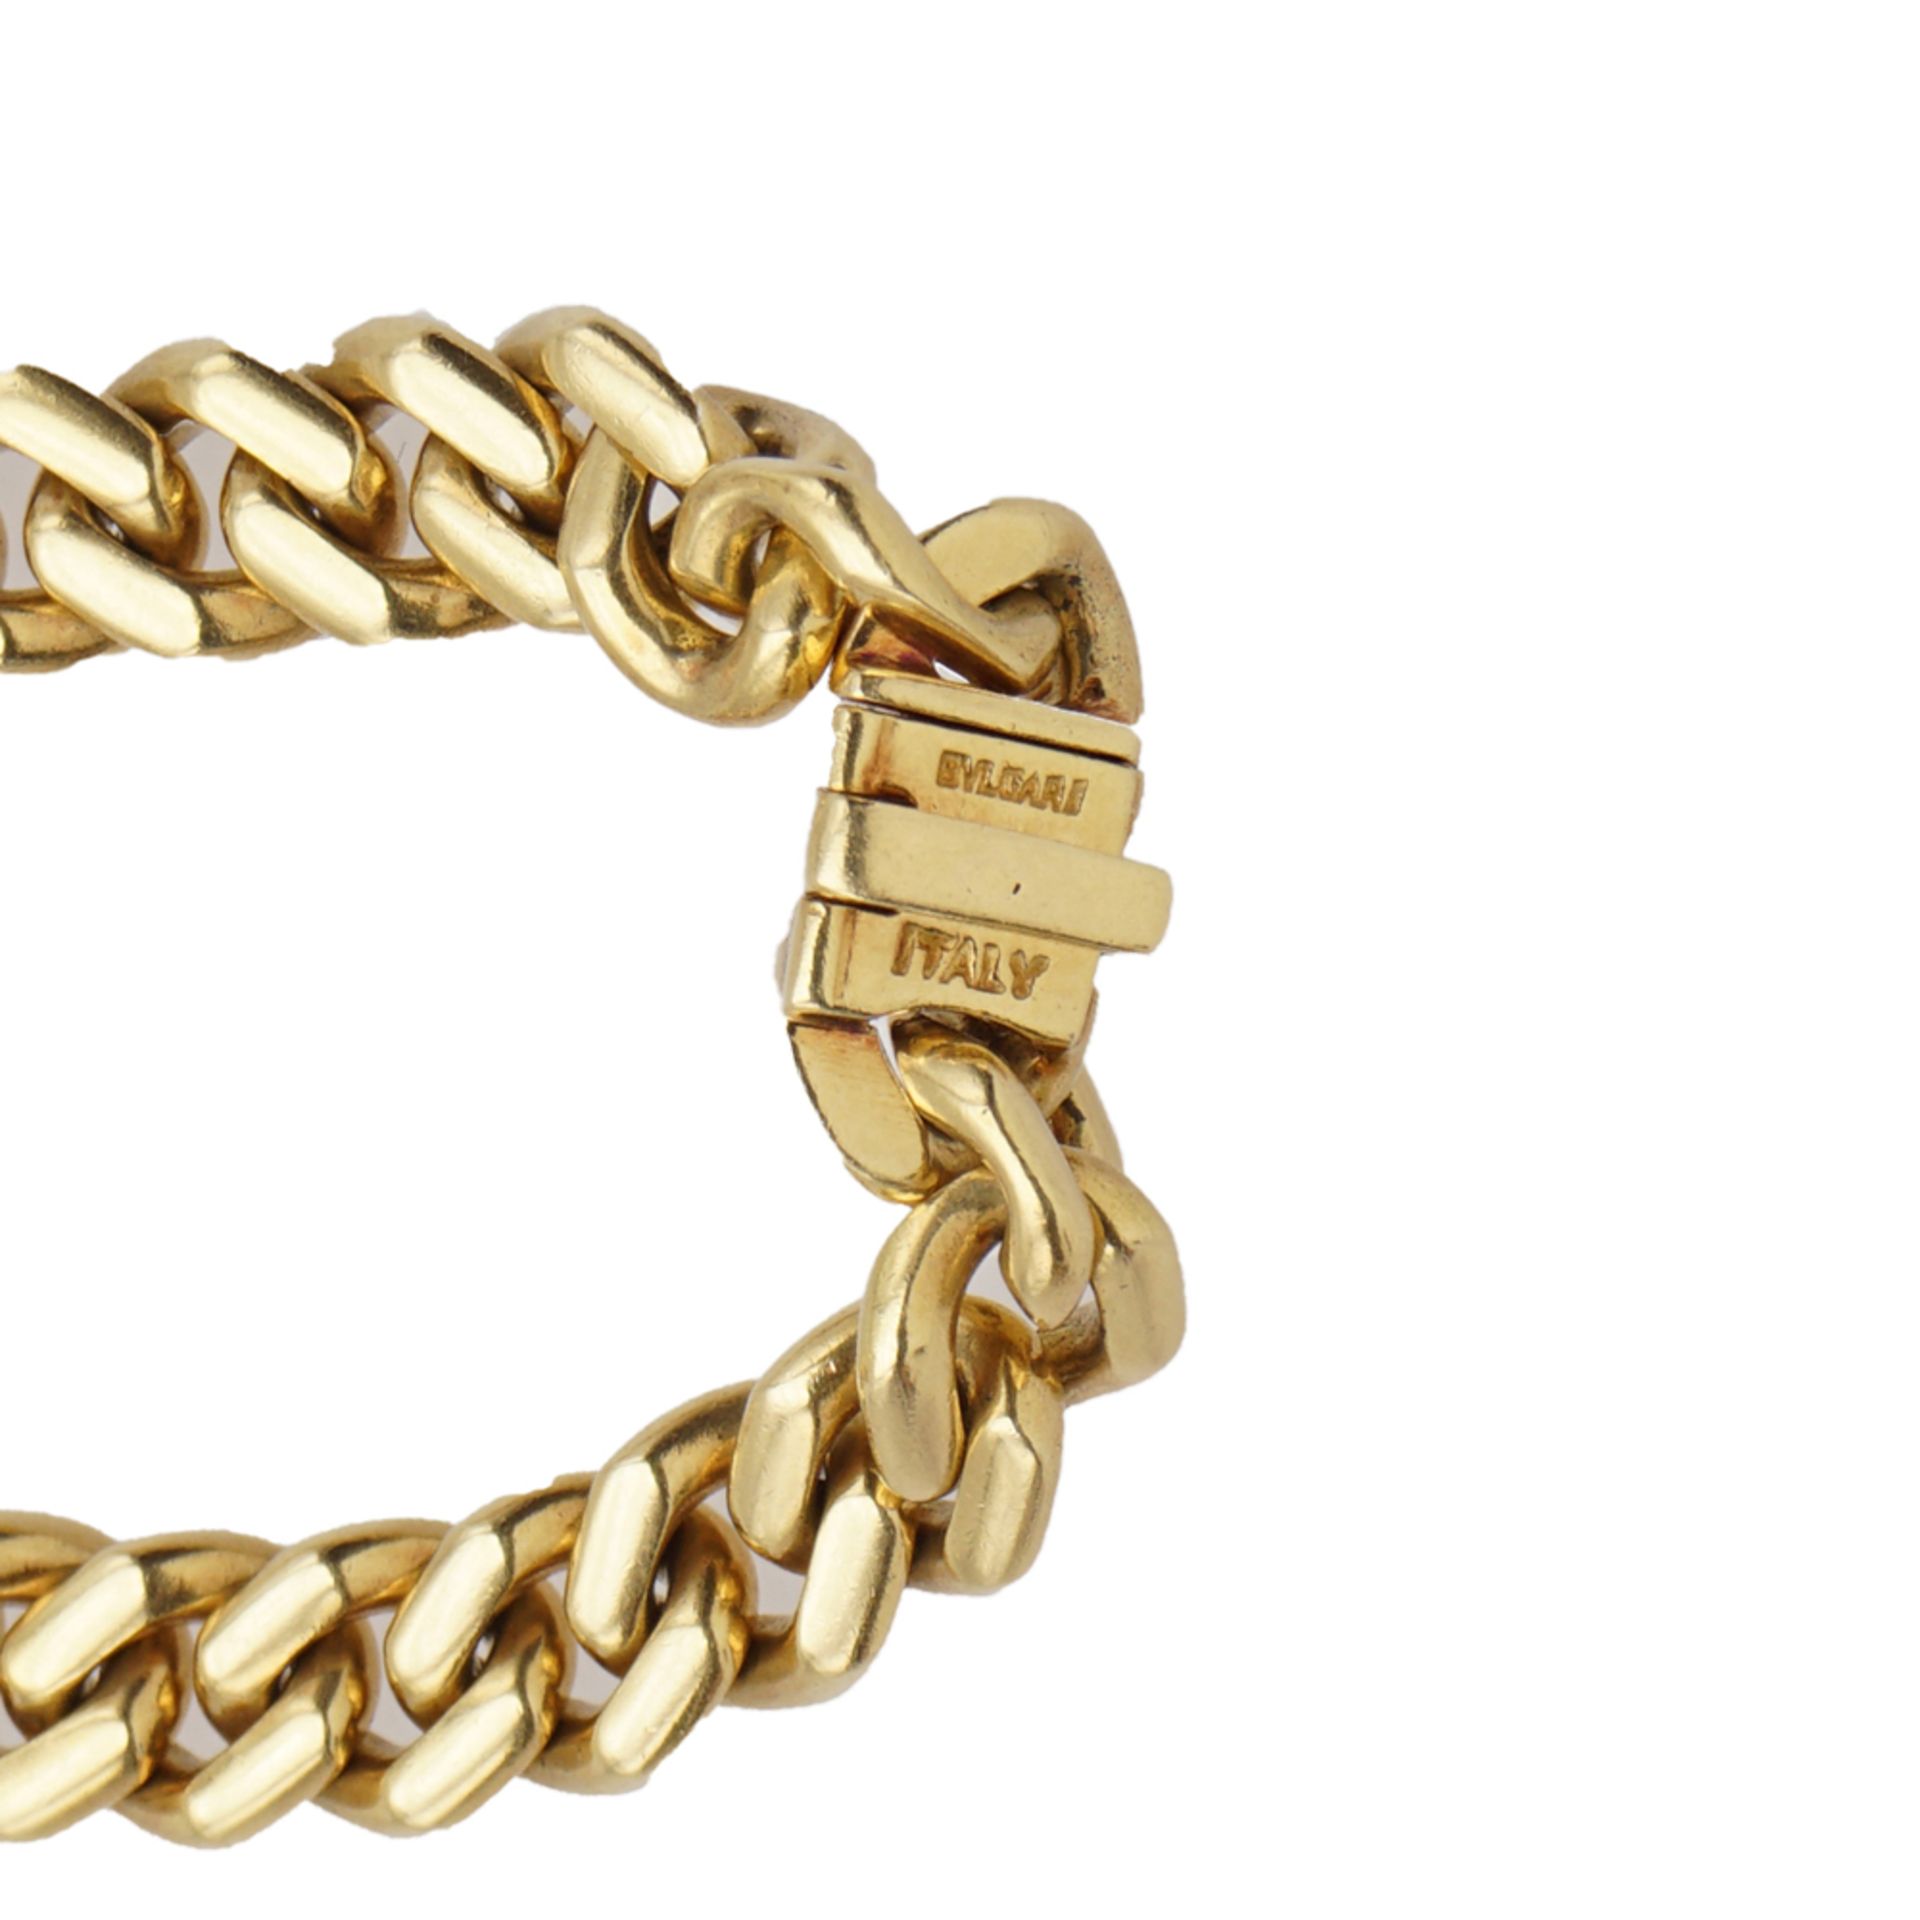 Bulgari, 18kt yellow gold groumette link necklace - Image 2 of 2